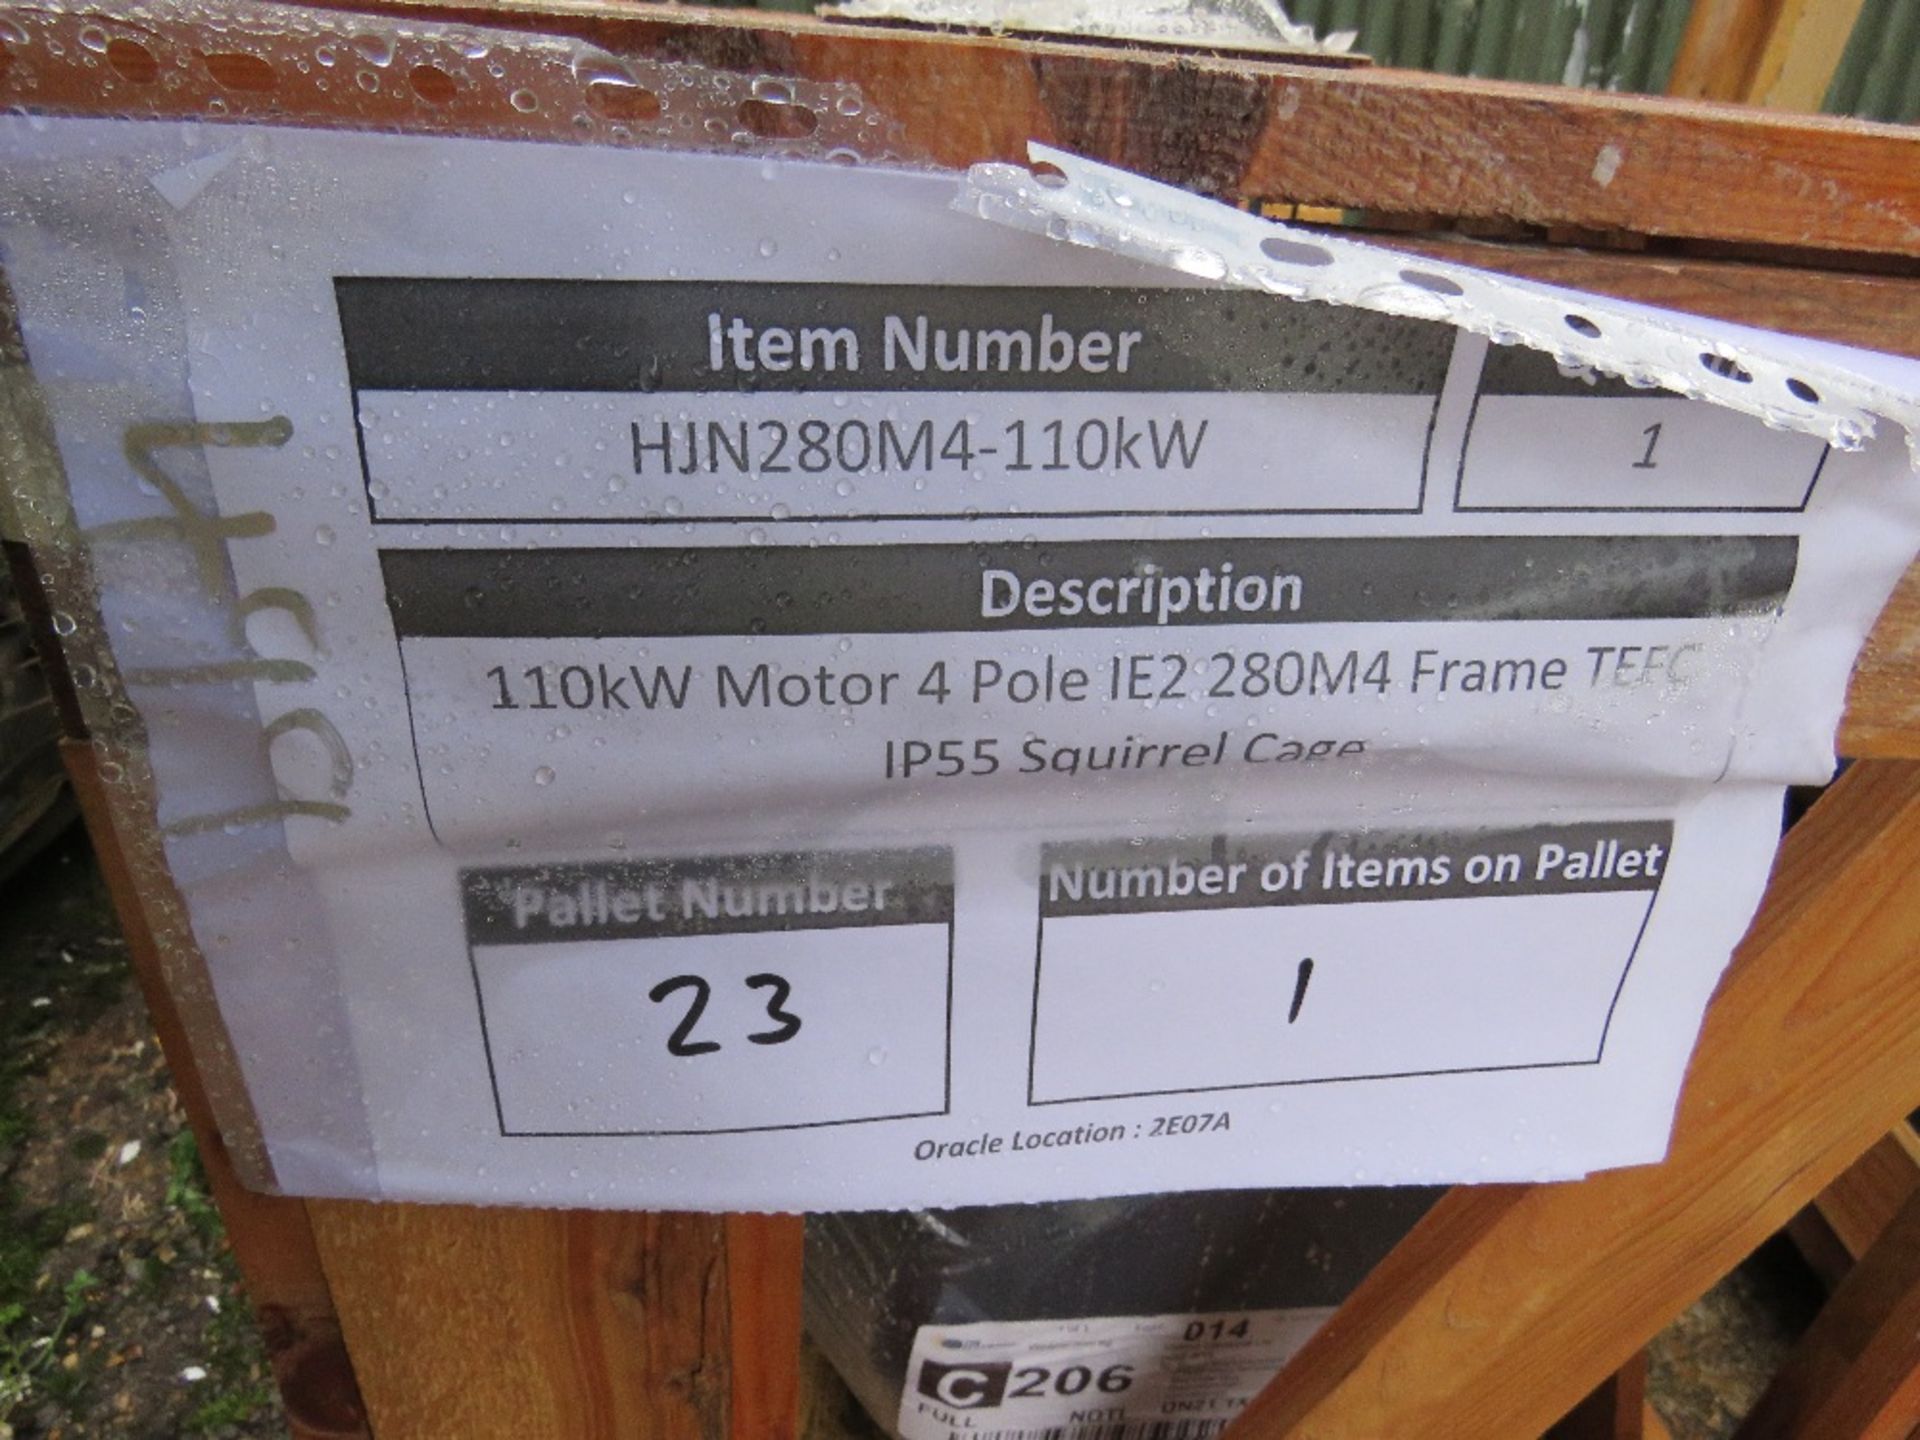 1 X 110KW ELECTRIC MOTOR, 400/690 VOLT POWERED. BOXED/PACKAGED. BELIEVED TO BE NEW/UNUSED. SOURCED F - Image 5 of 6